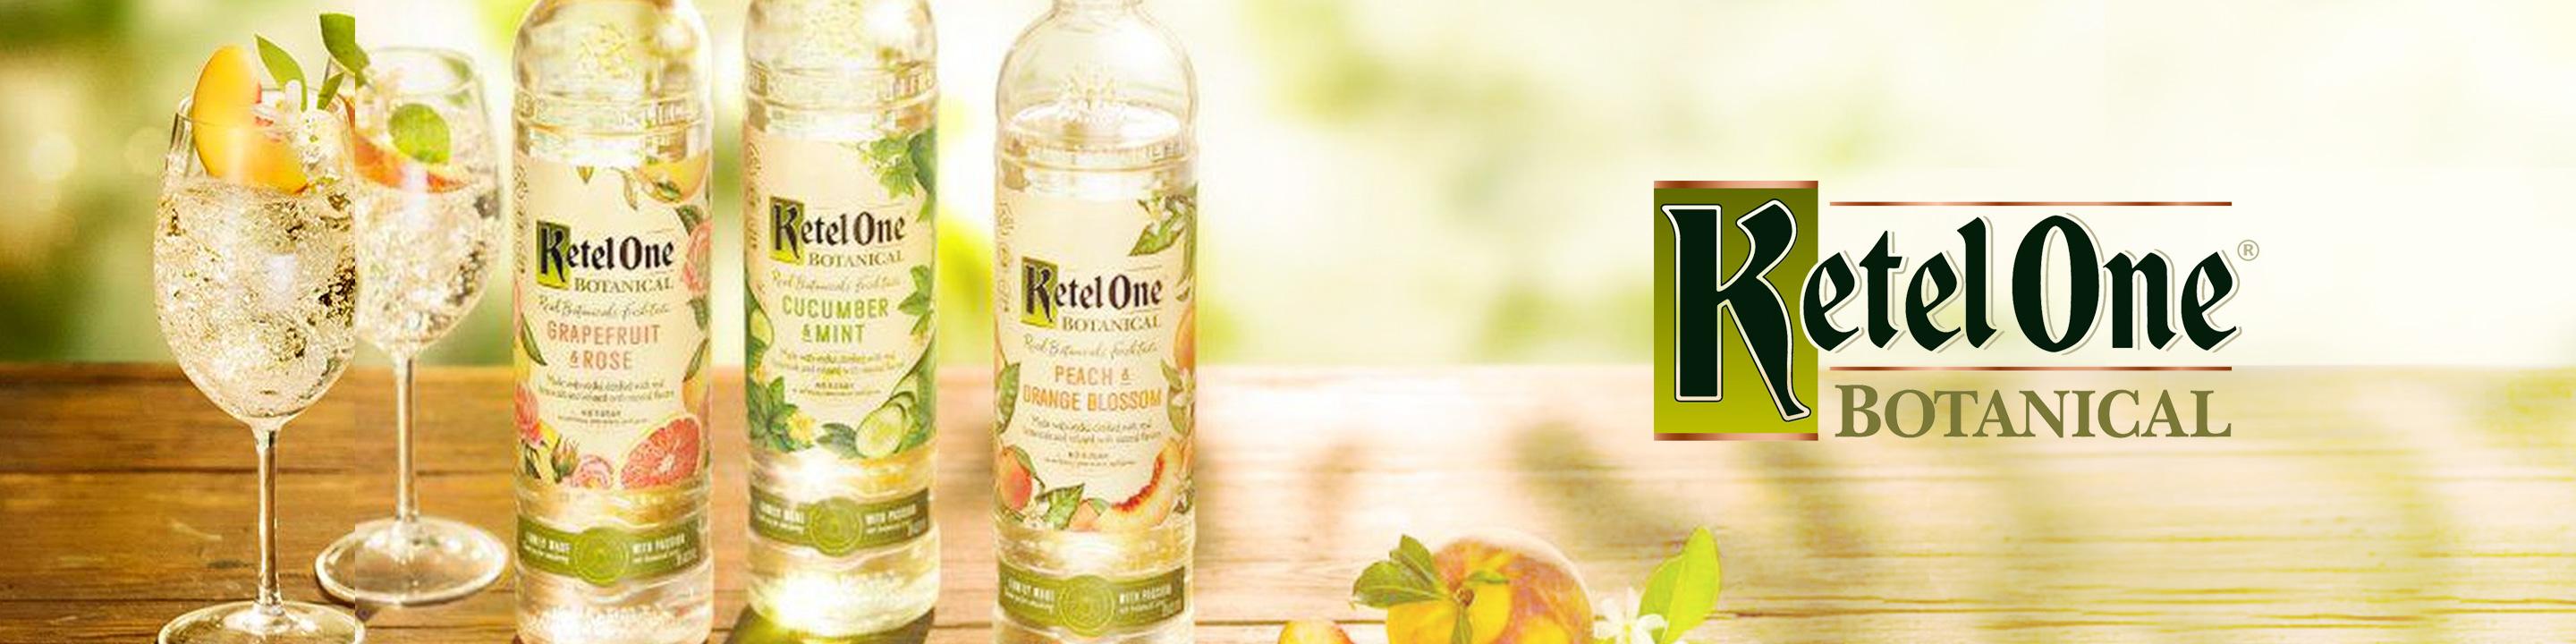 Ketel One Vodka is a truly exceptional super-premium vodka with a rich family heritage that stretches back over 11 generations. It is made by the famous Nolet distilling family who have been crafting fine spirits for 325 years.  Buy Ketel One online now from nearby liquor stores via Minibar Delivery.